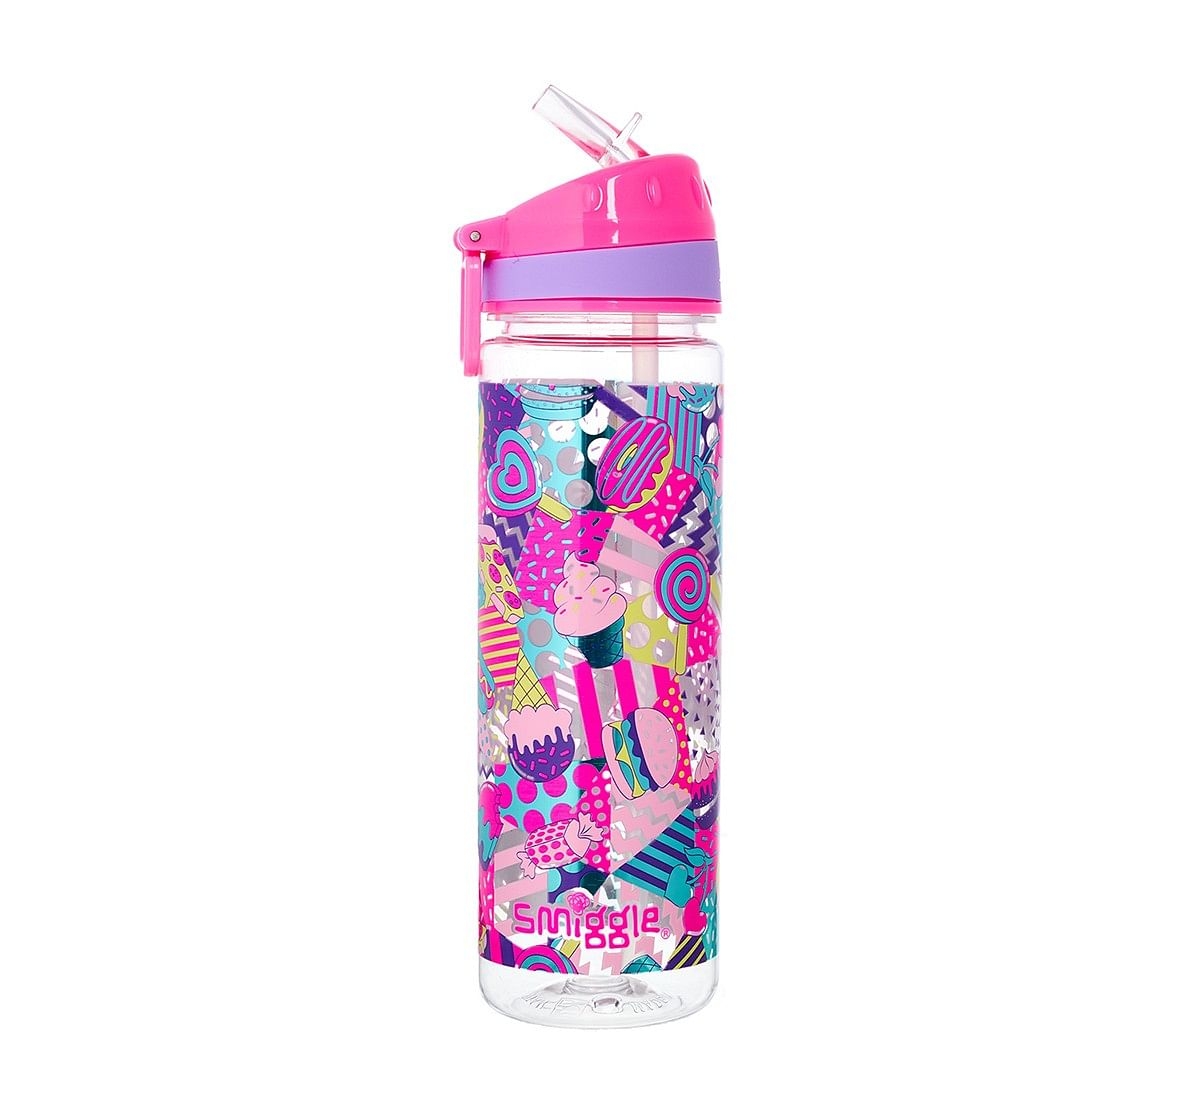 Smiggle Far Away Drink Bottle with Flip Top Spout - Ice-cream Print Bags for Kids age 3Y+ (Pink)